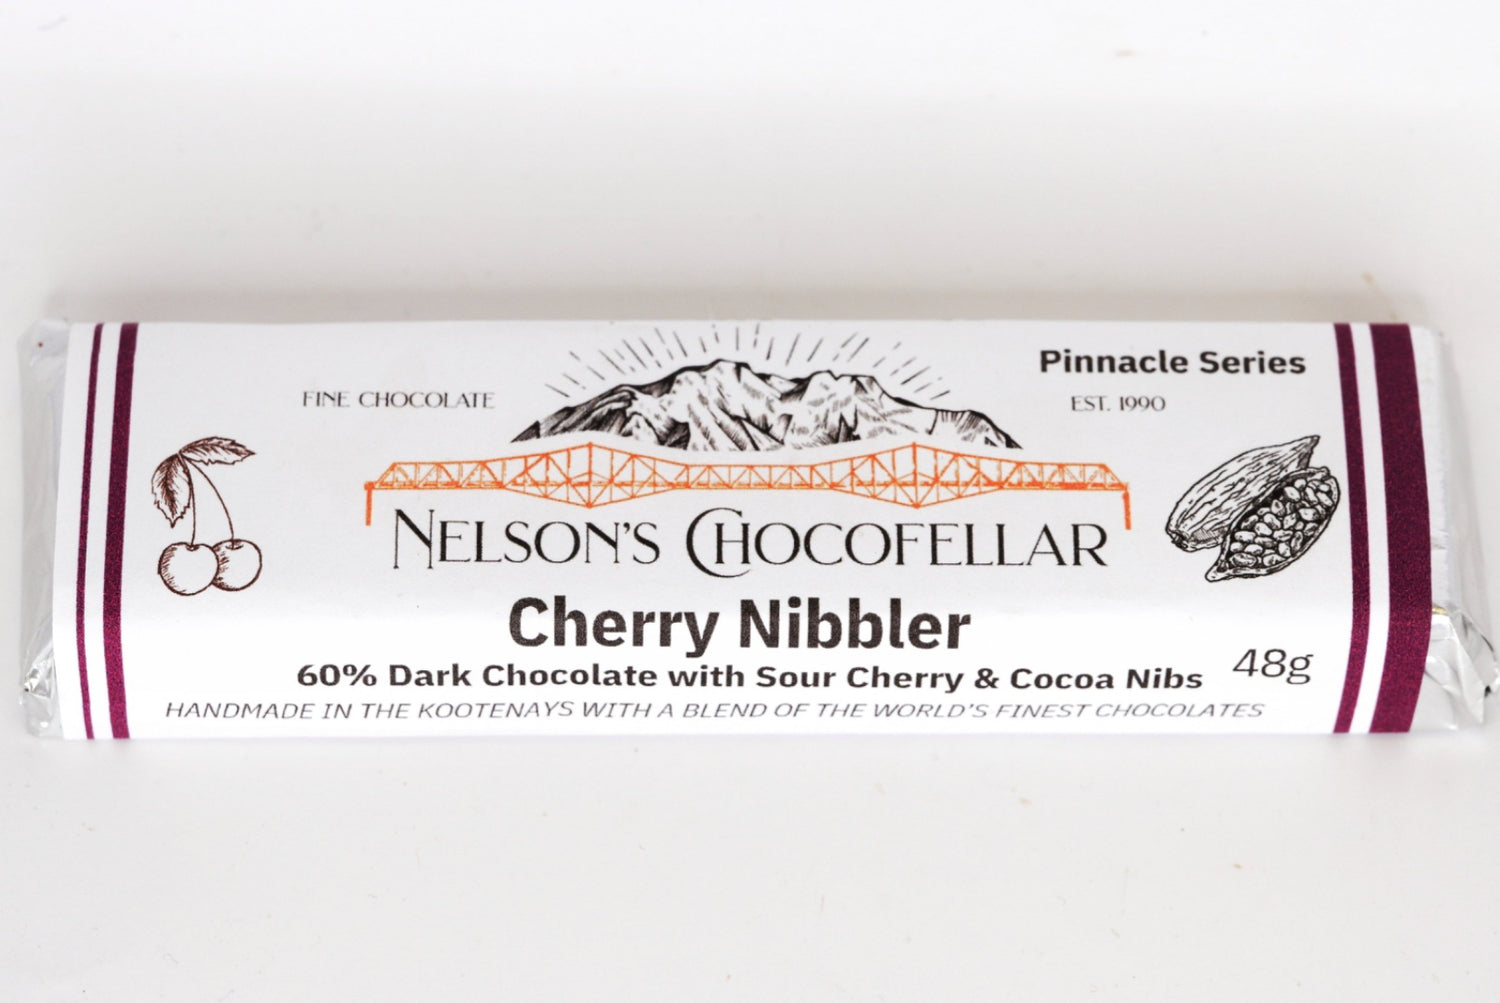 Cherry Nibbler - 60% dark chocolate with sour cherry & cocoa nibs